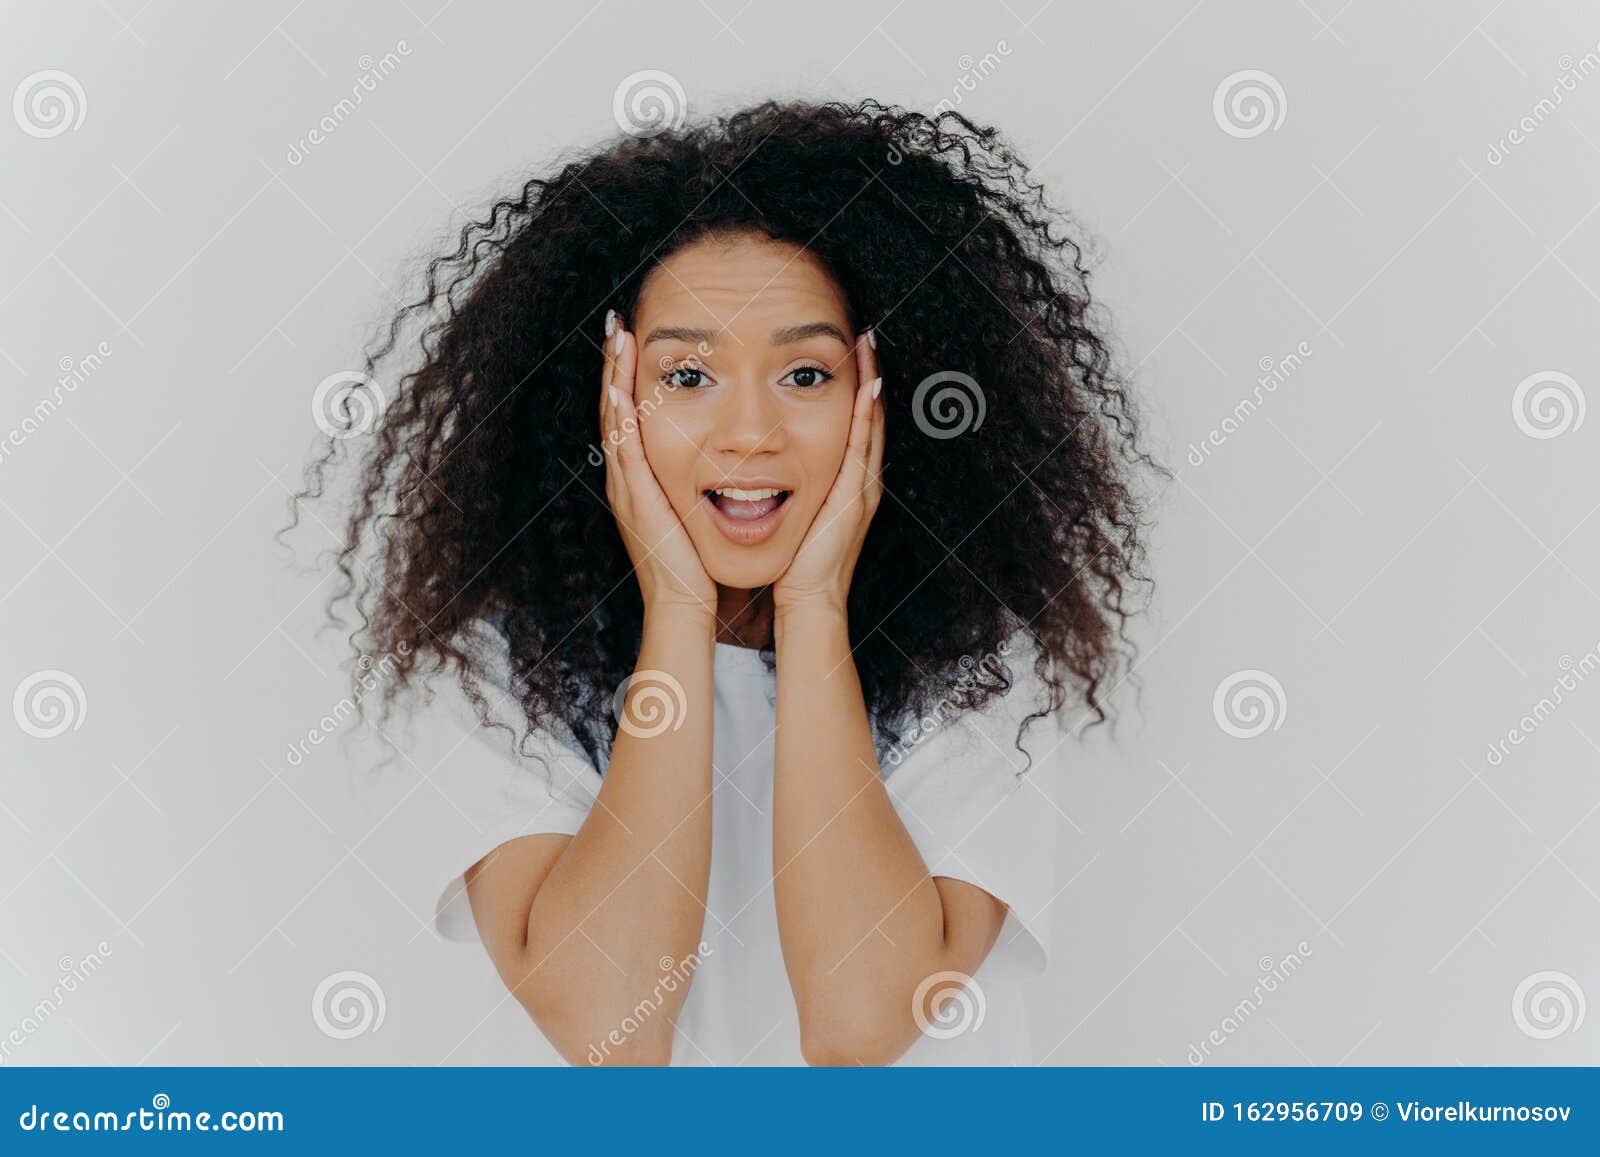 Photo Of Surprised Cheerful Woman With Afro Haircut Keeps Both Hands On Cheeks Has Natural